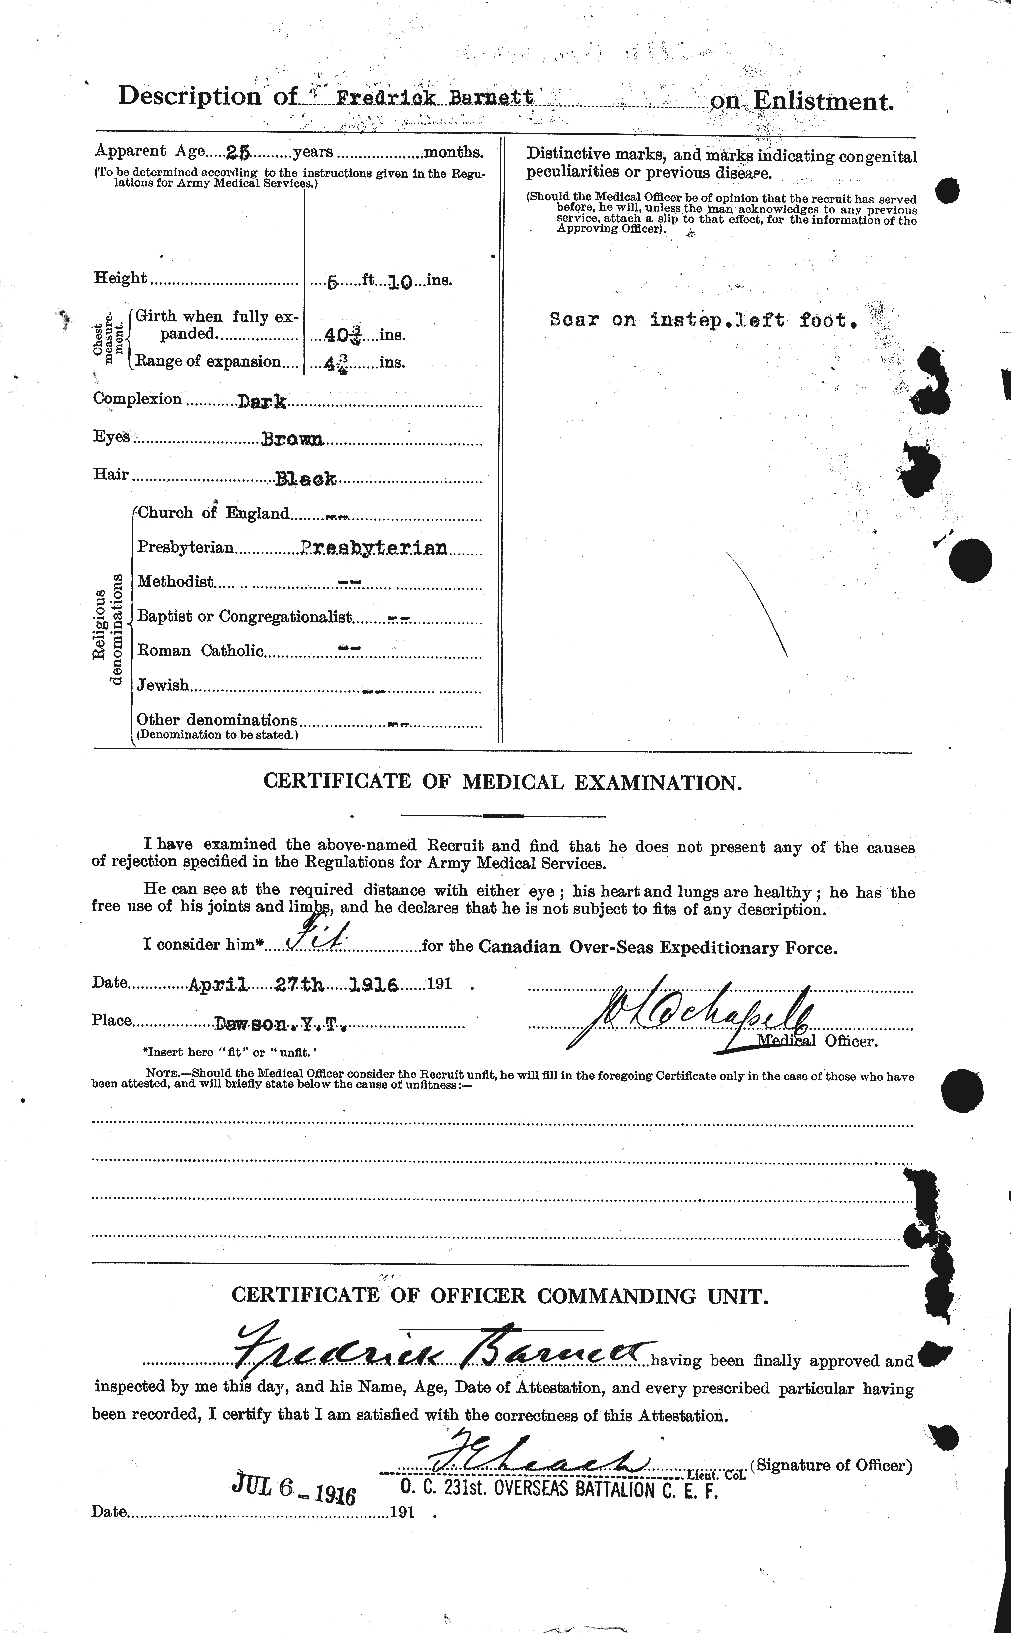 Personnel Records of the First World War - CEF 222974b